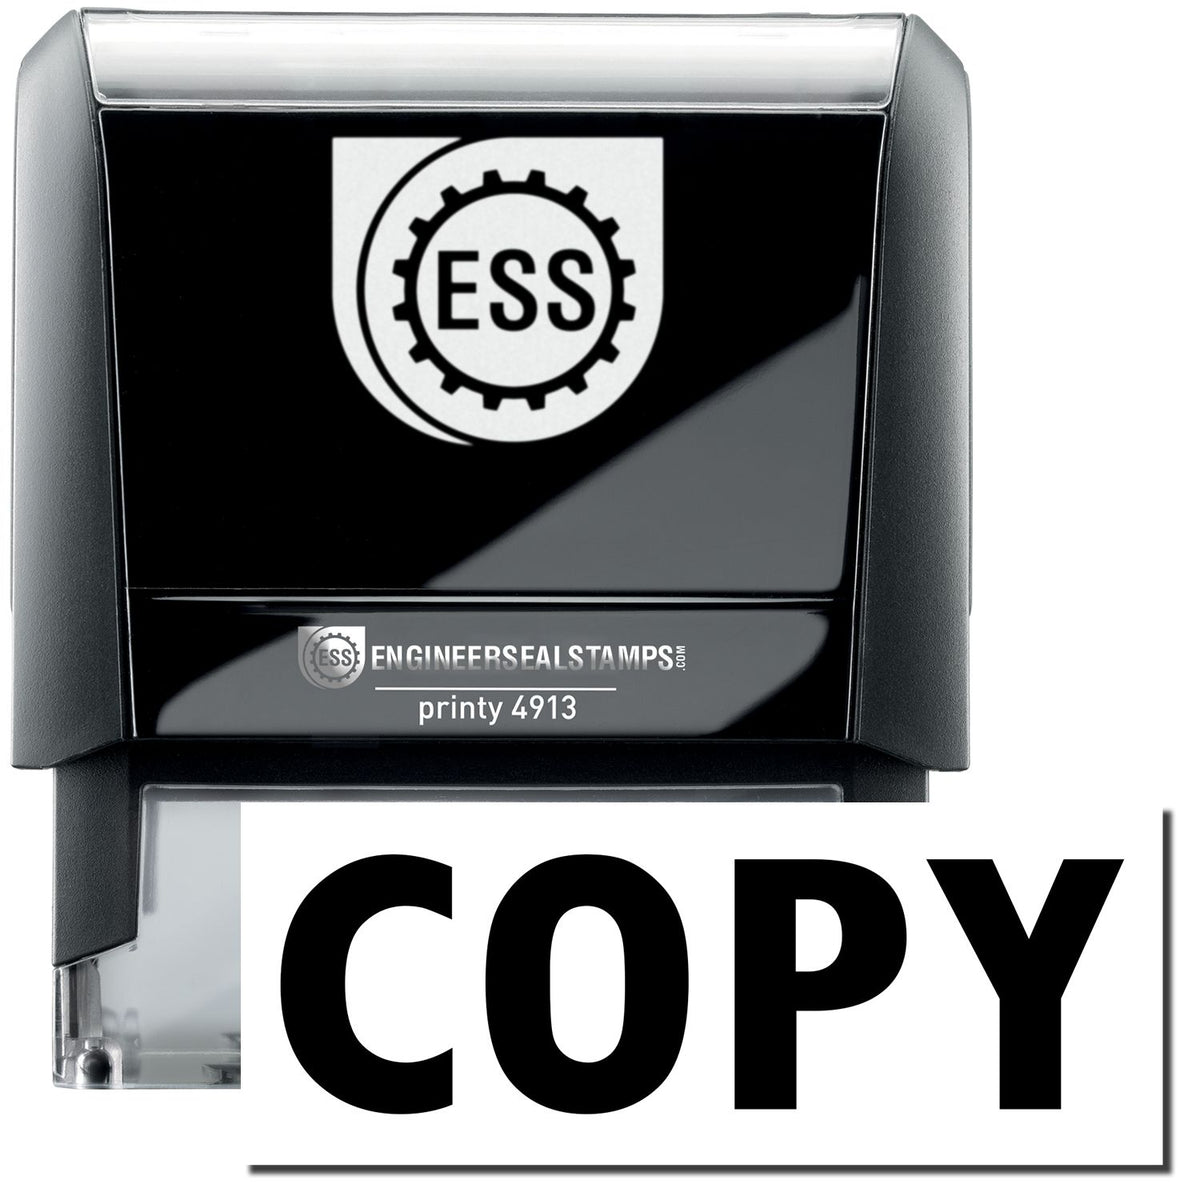 A large self-inking stamp with a stamped image showing how the text &quot;COPY&quot; in a large bold font is displayed by it.